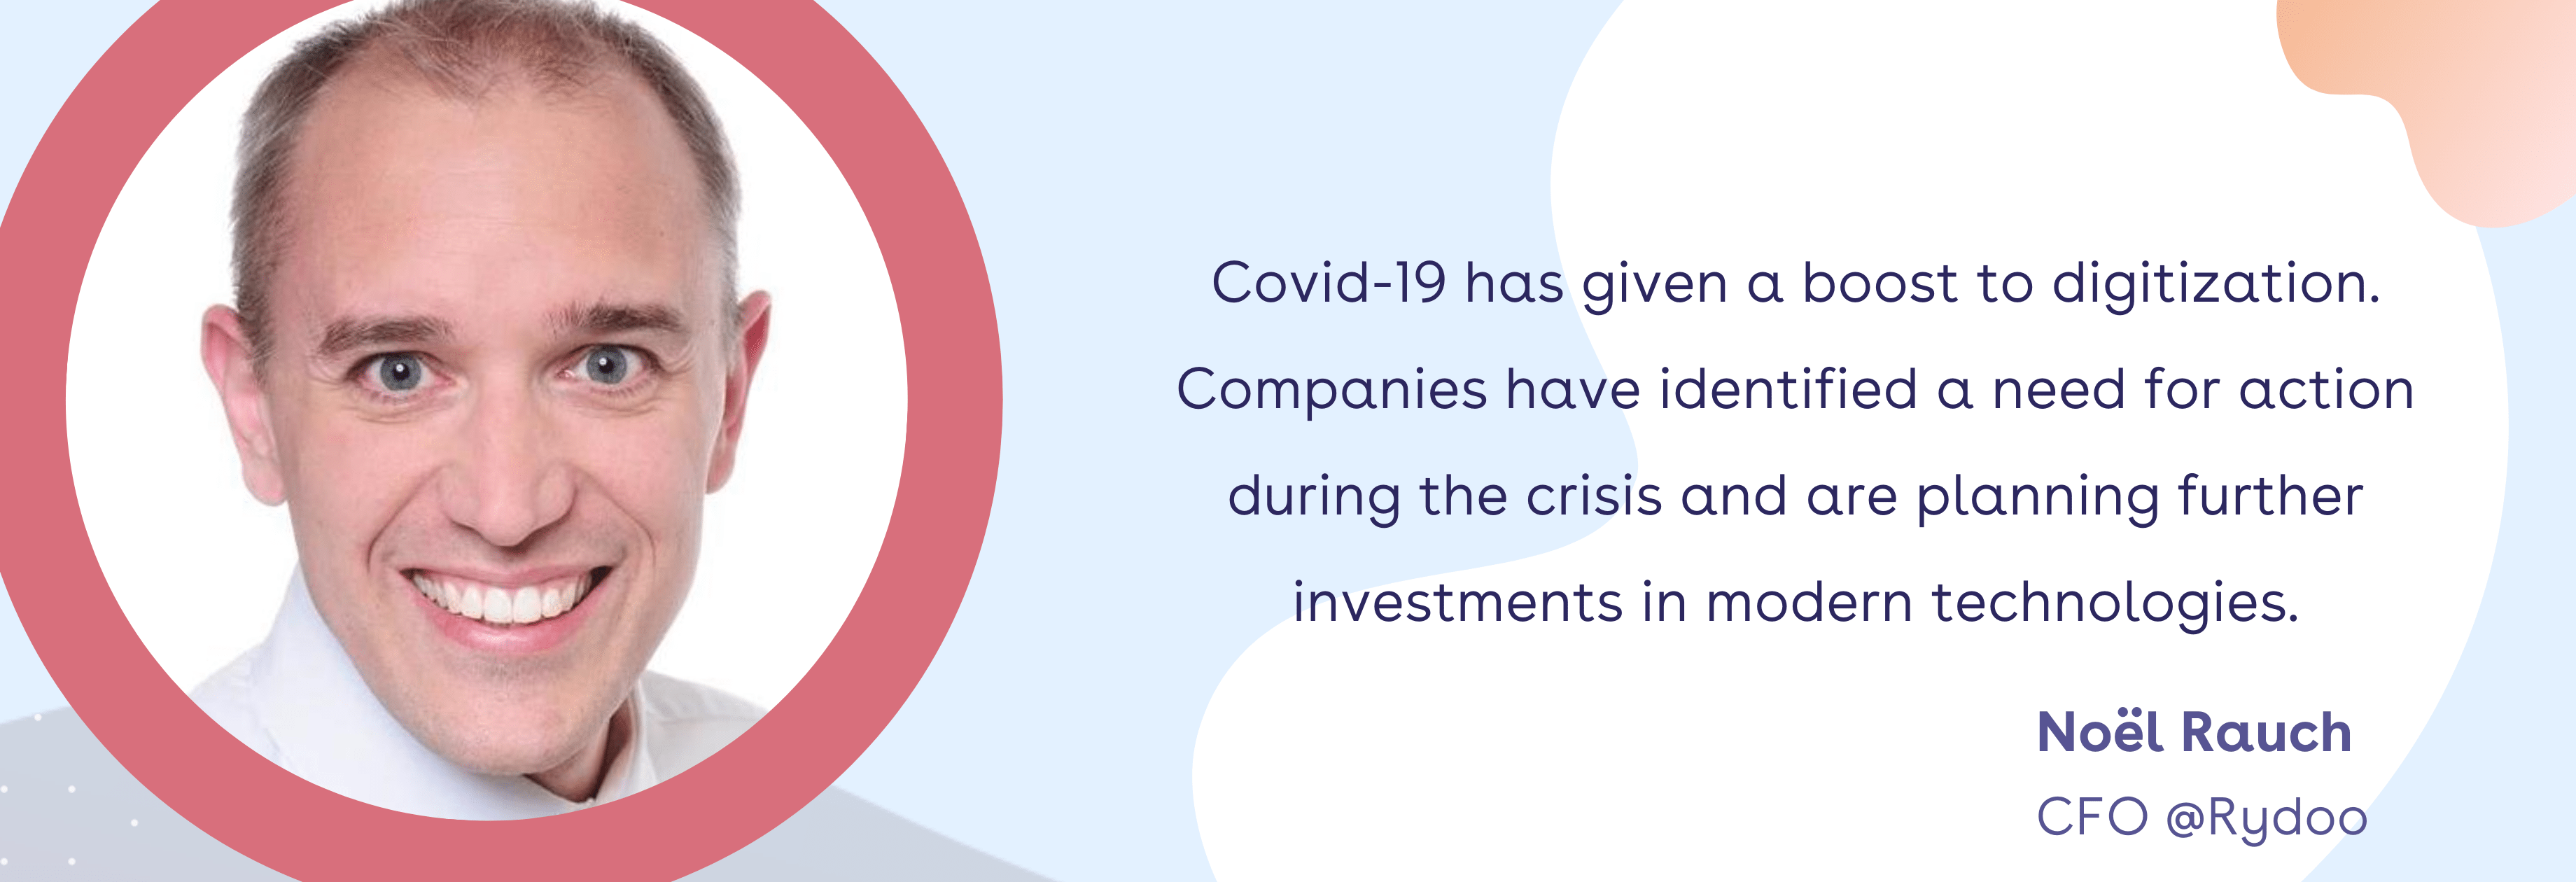 Finance Trends: Covid-19 has given a boost to digitization. Companies have identified a need for action during the crisis and are planning further investments in modern technologies.